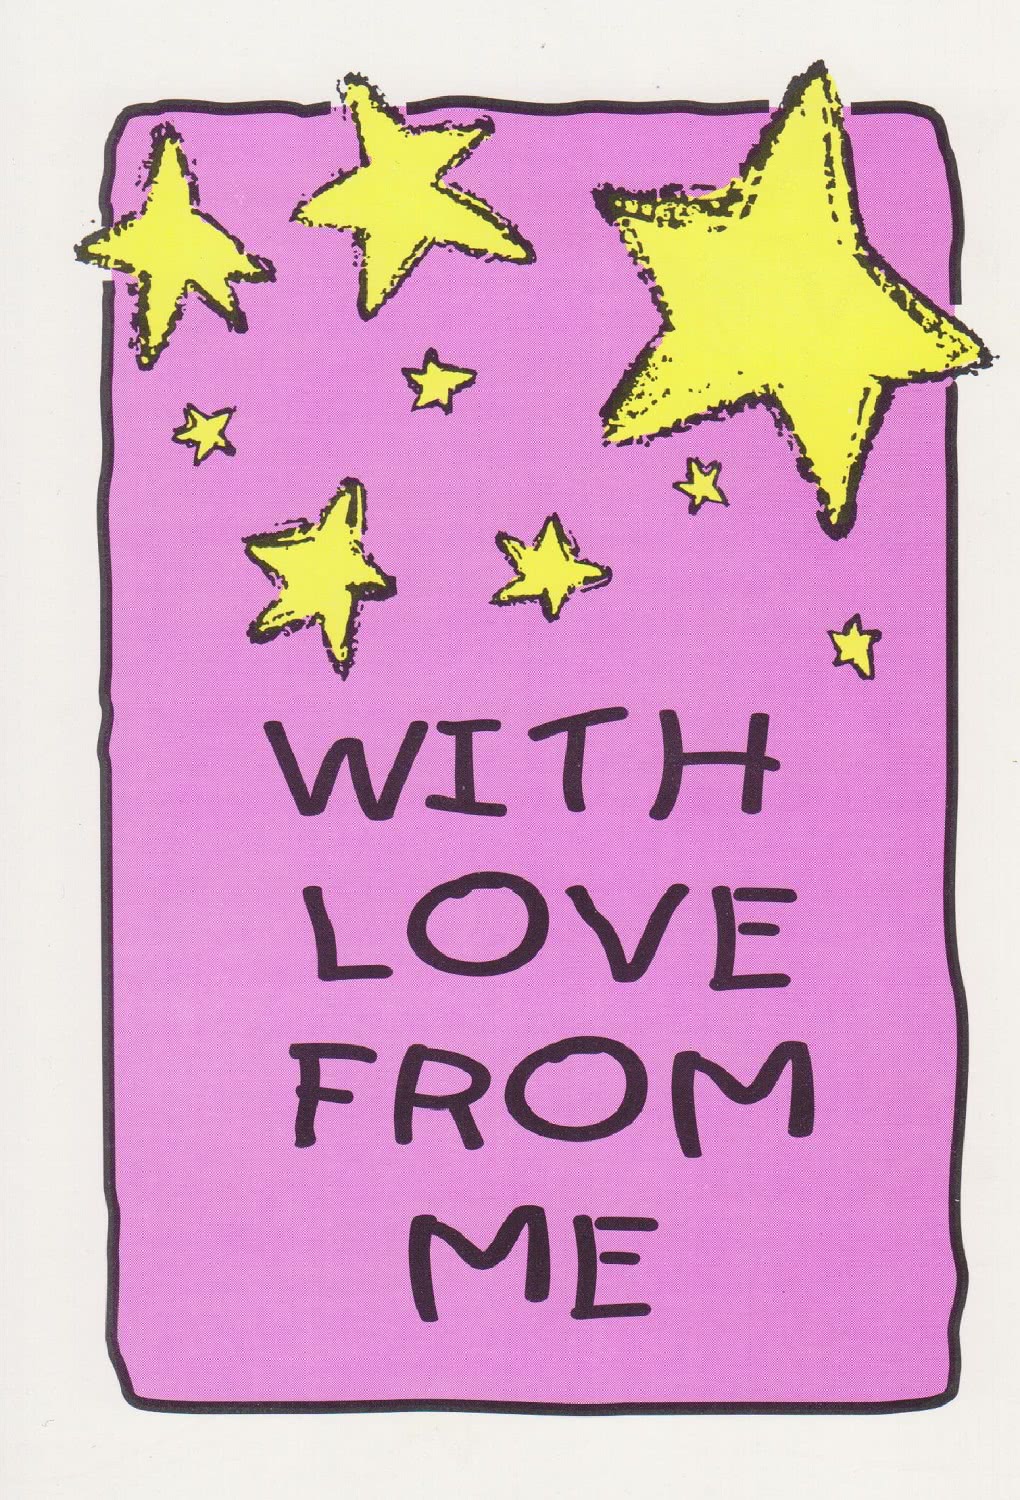 The Best Mother's Day Card. The front has yellow stars on a Purple background. Text says "With love from me" and has a framed space to make a hand or footprint. These make nice keepsakes for parents